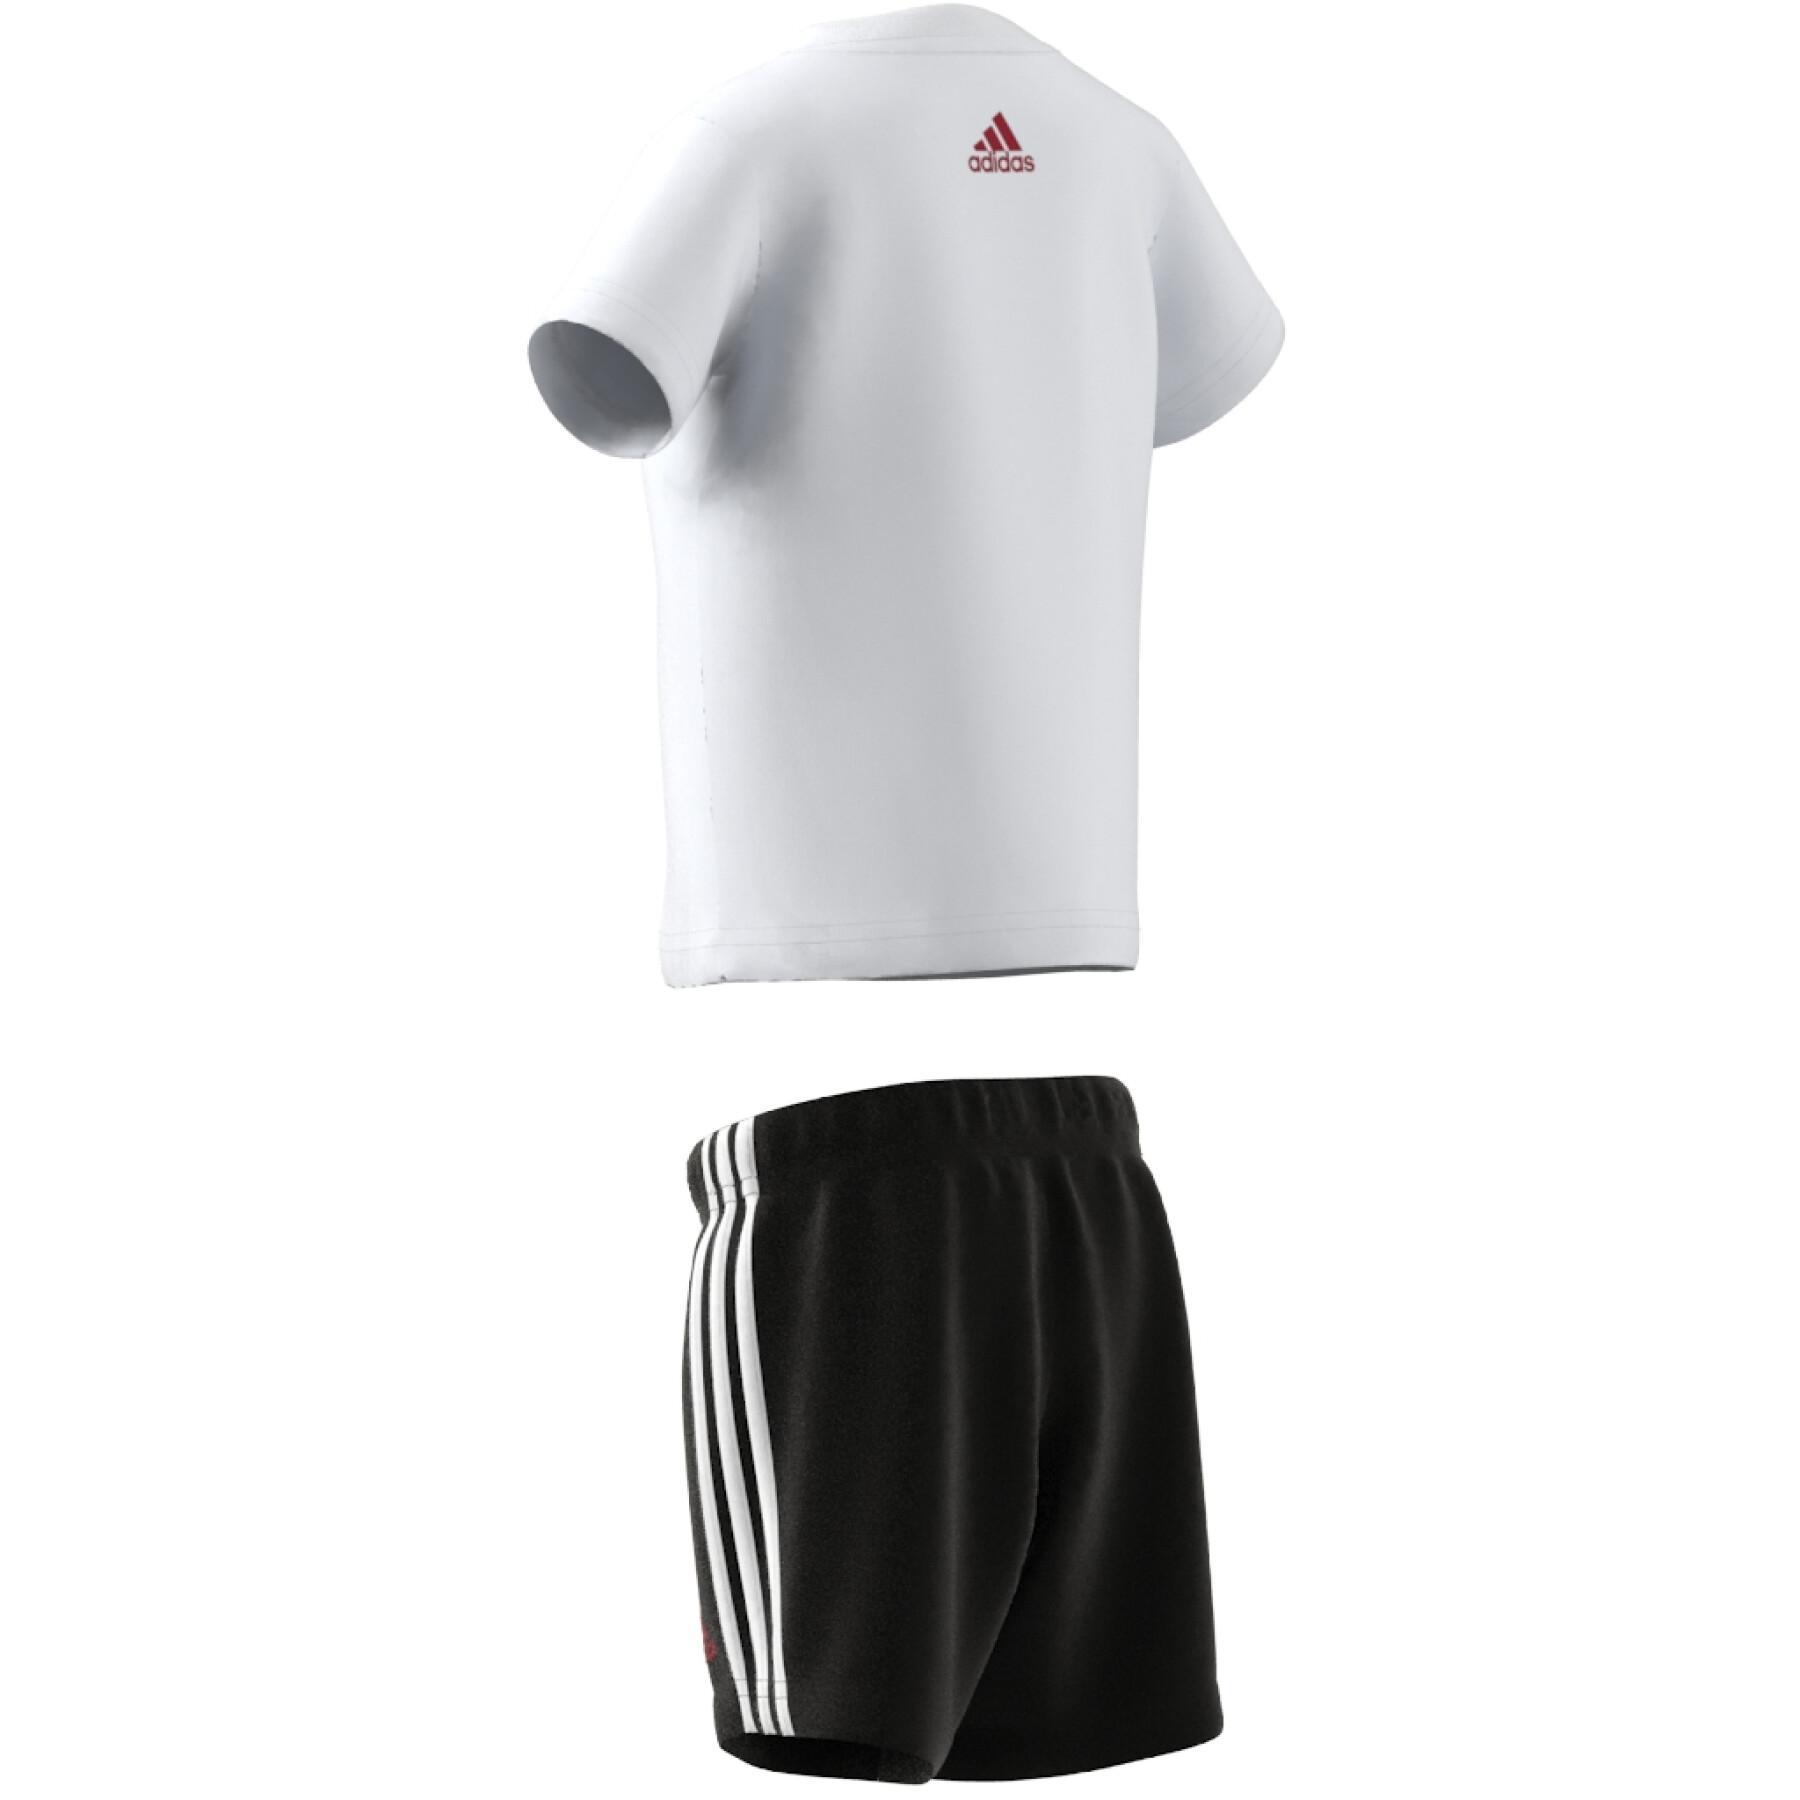 Organic t-shirt Lifestyle and Brands shorts - - 3-Stripes - adidas Lineage cotton adidas Essentials set